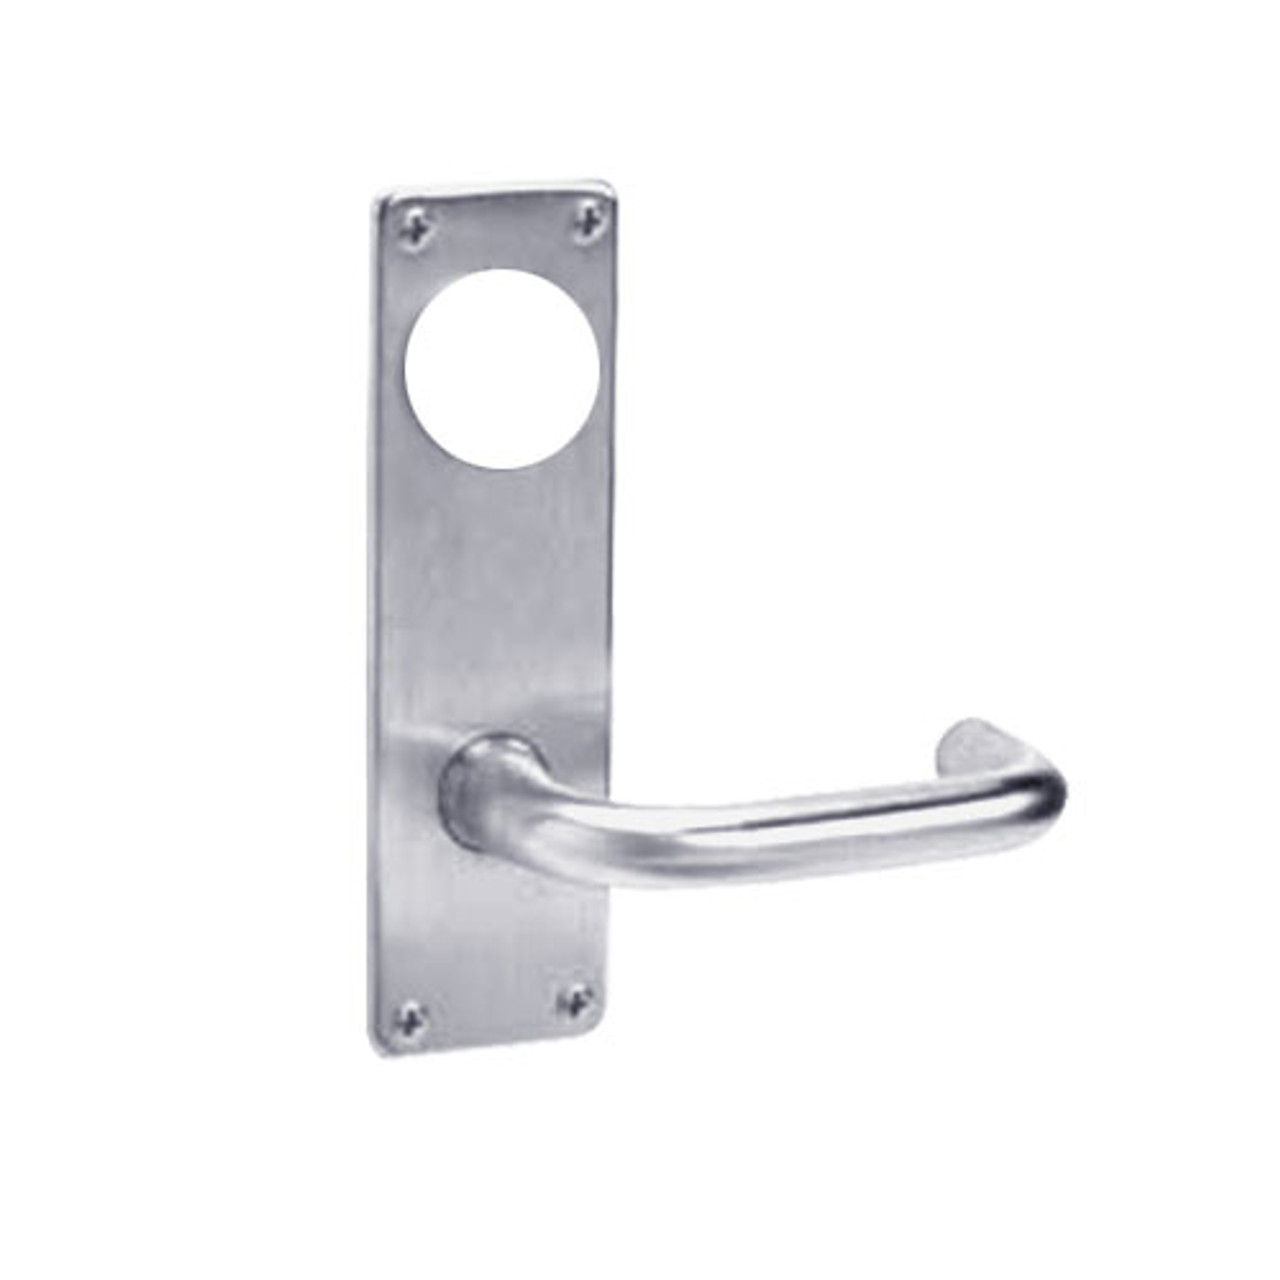 ML2057-LSN-626-CL7 Corbin Russwin ML2000 Series IC 7-Pin Less Core Mortise Storeroom Locksets with Lustra Lever in Satin Chrome